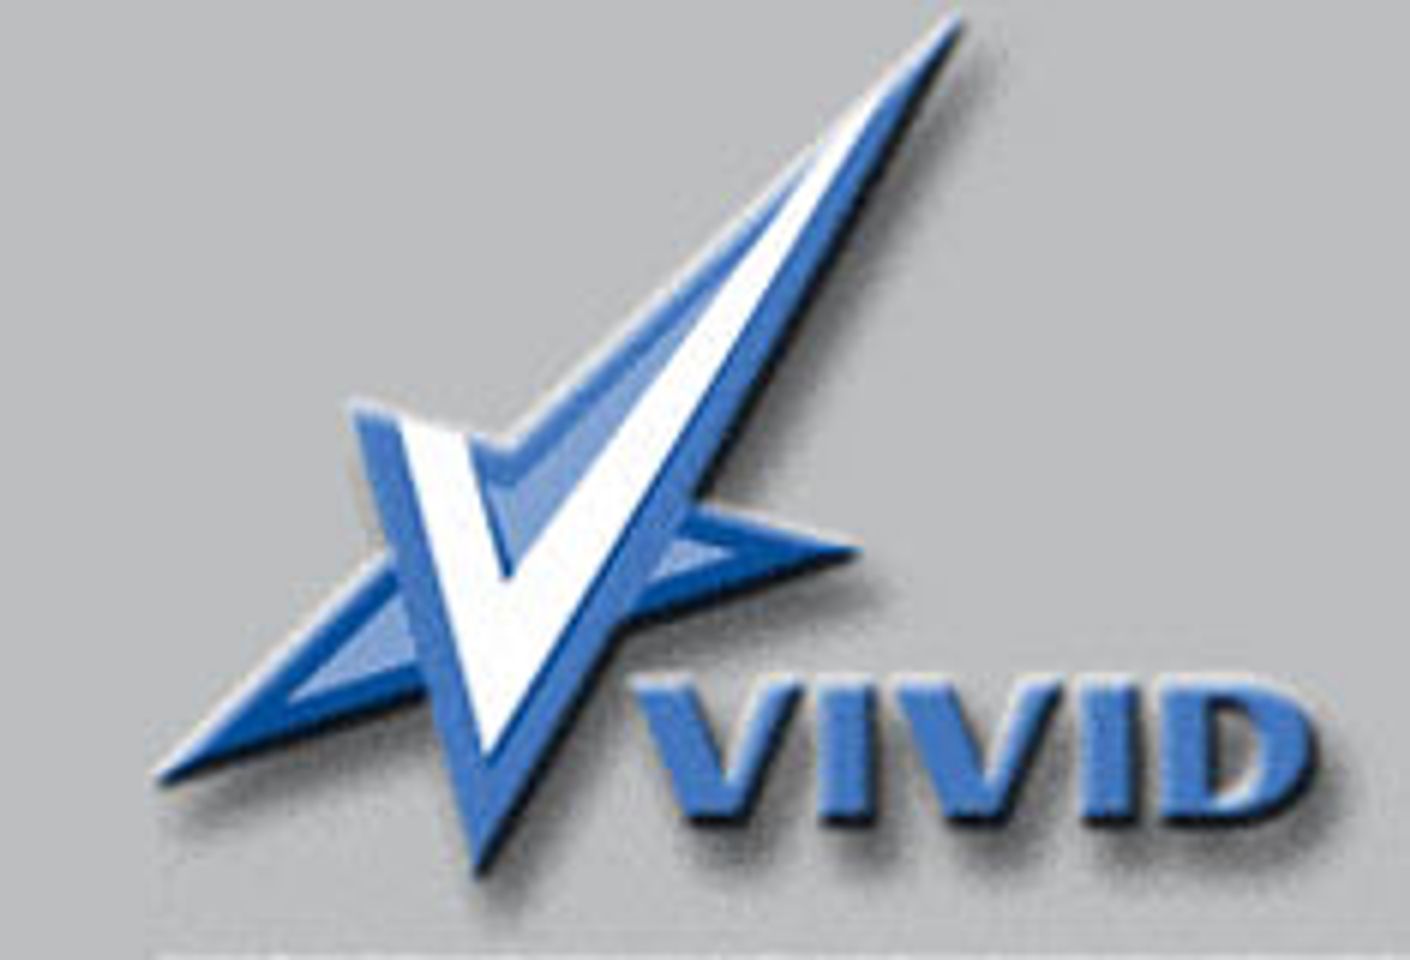 Vivid Goes in New Directions